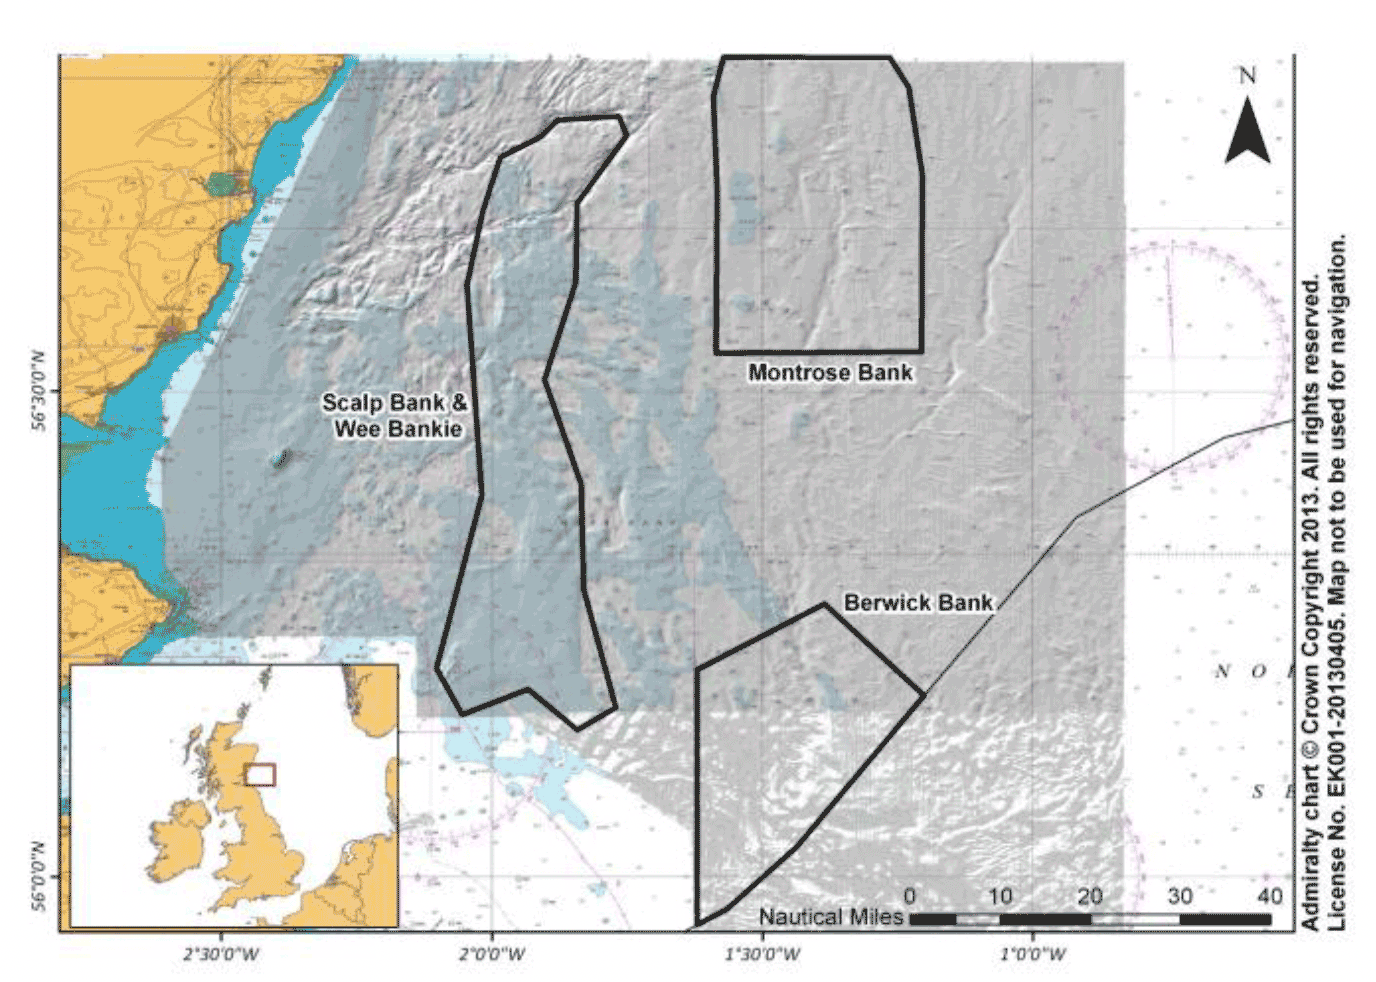 A nautical map of the sea area off south east Scotland with the boundaries of the three components of Firth of Forth Banks Complex MPA marked on the map.